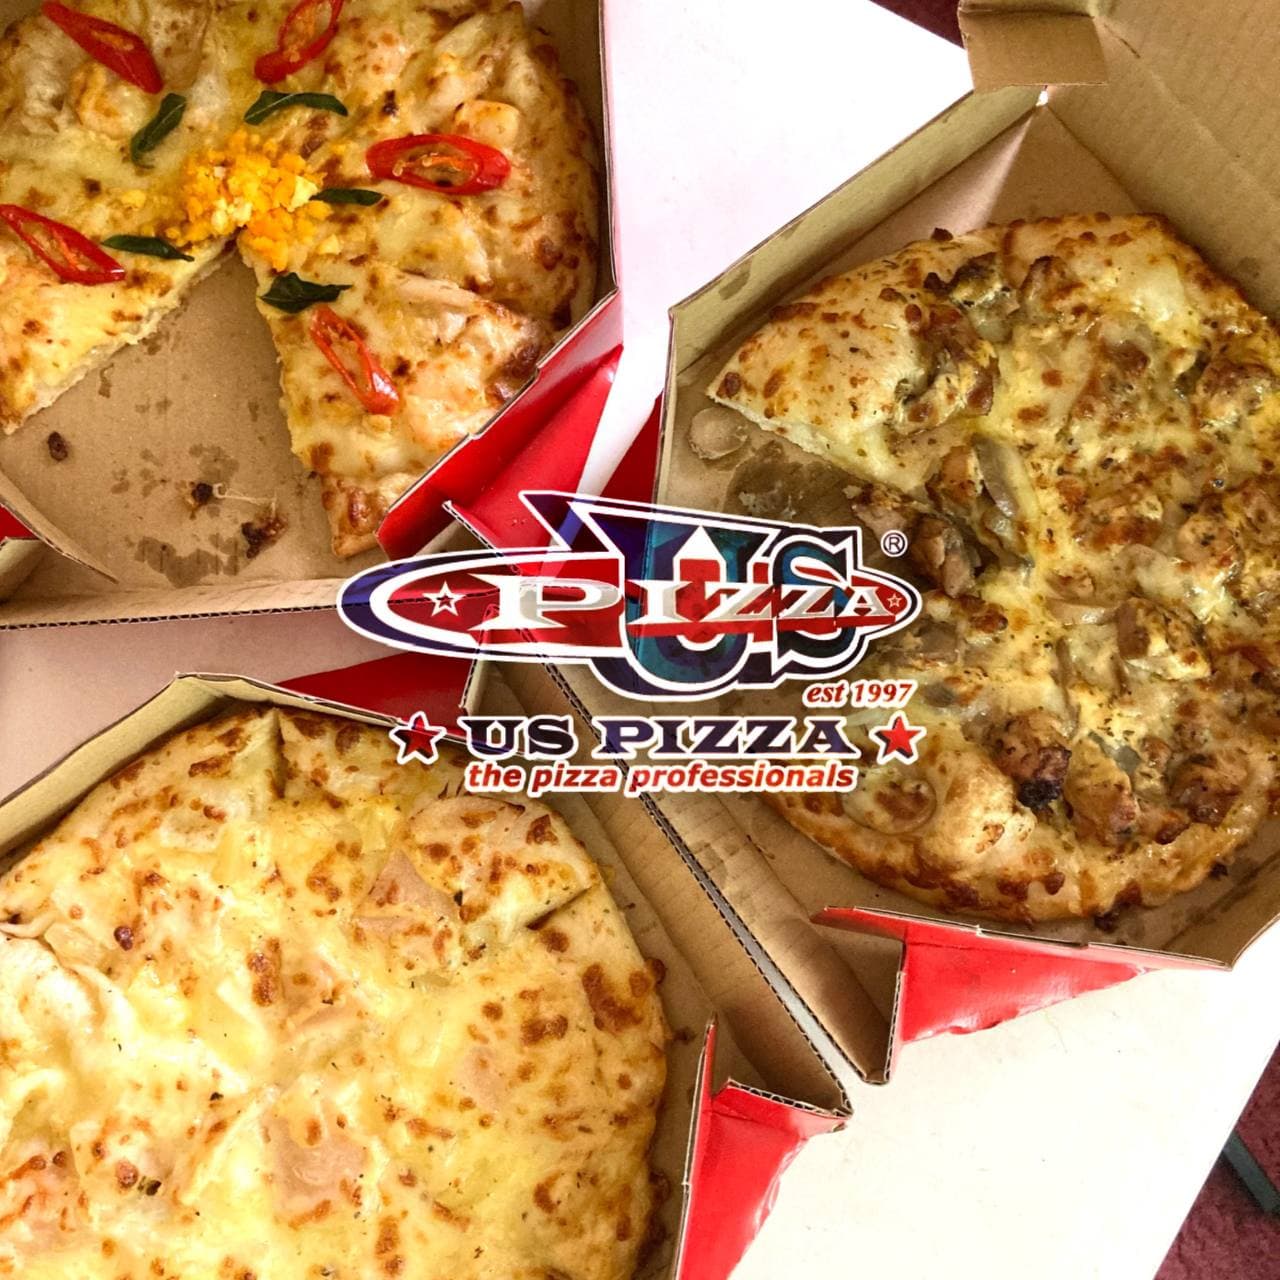 Thank You #USPizzaSS2 USPIZZA Malaysia Sending Me Super Yummy Pizza! Must Try!